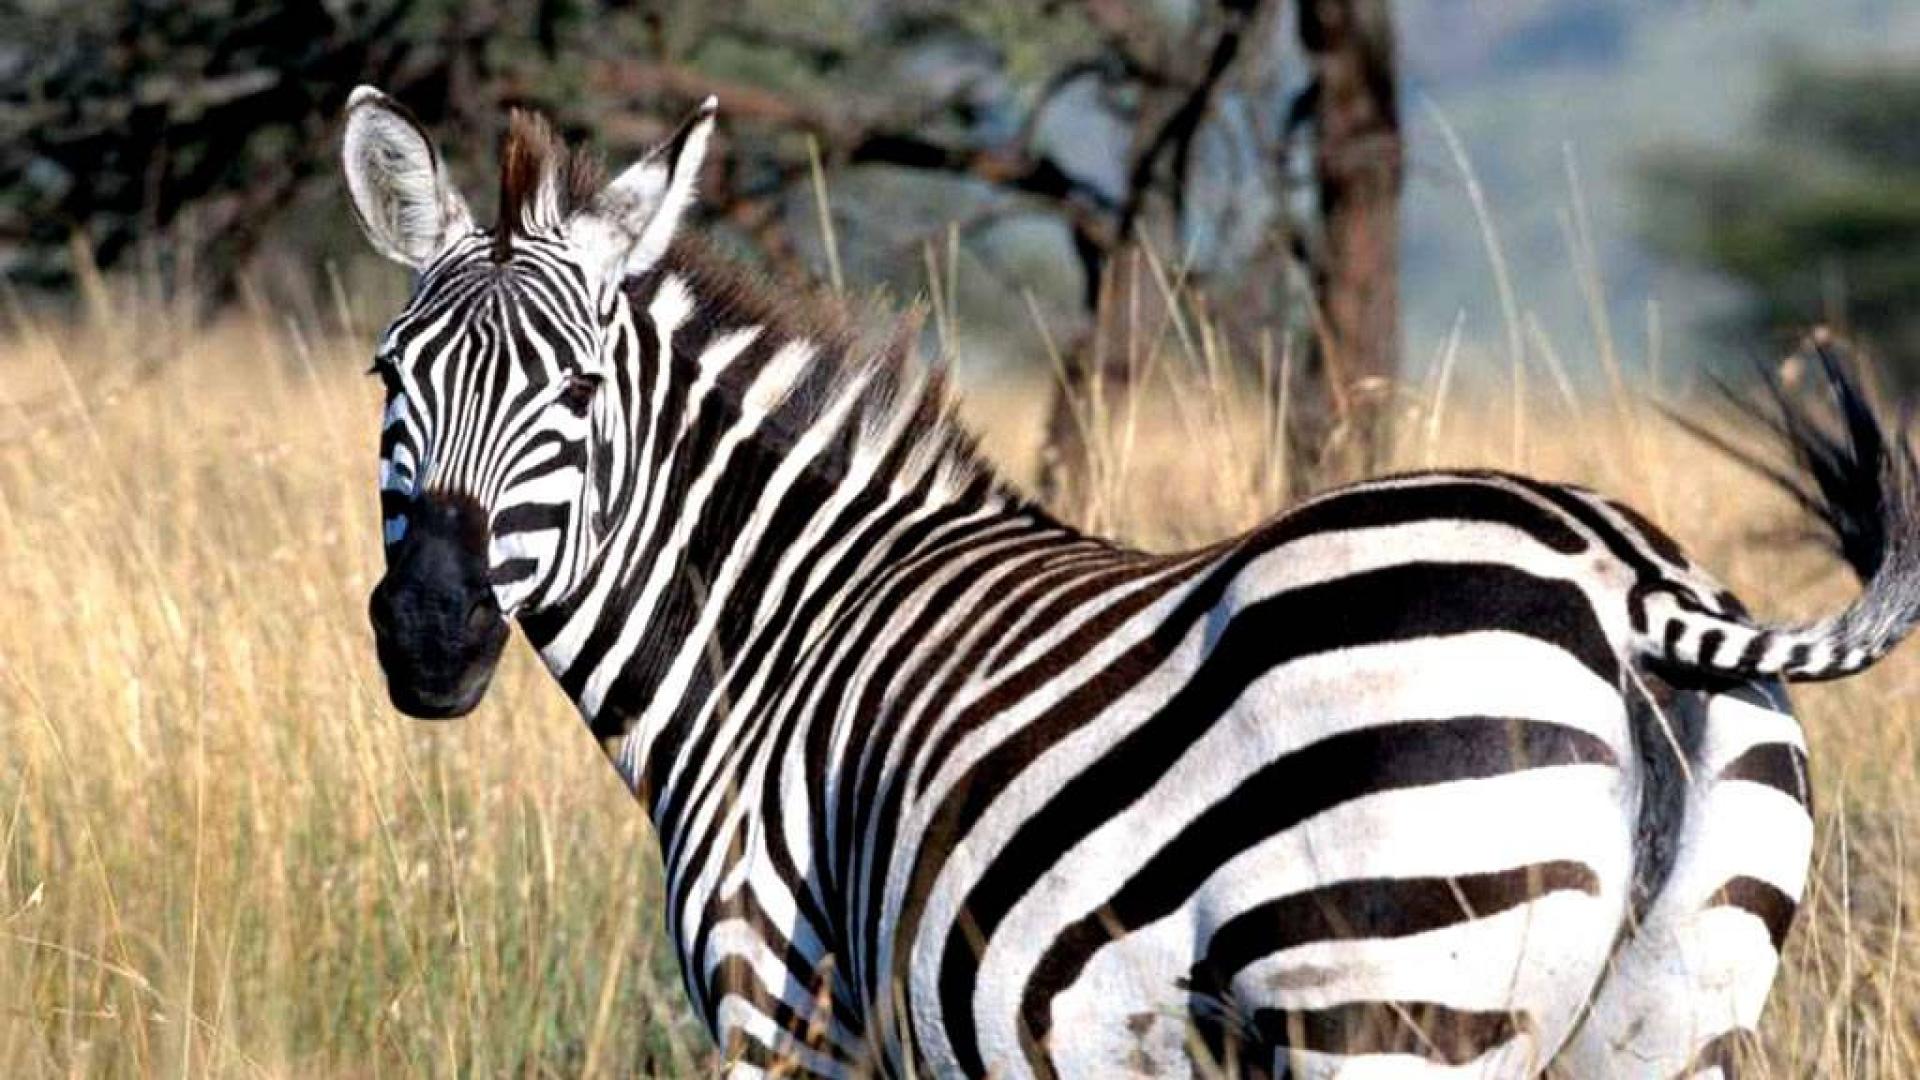 170 Zebra HD Wallpapers and Backgrounds